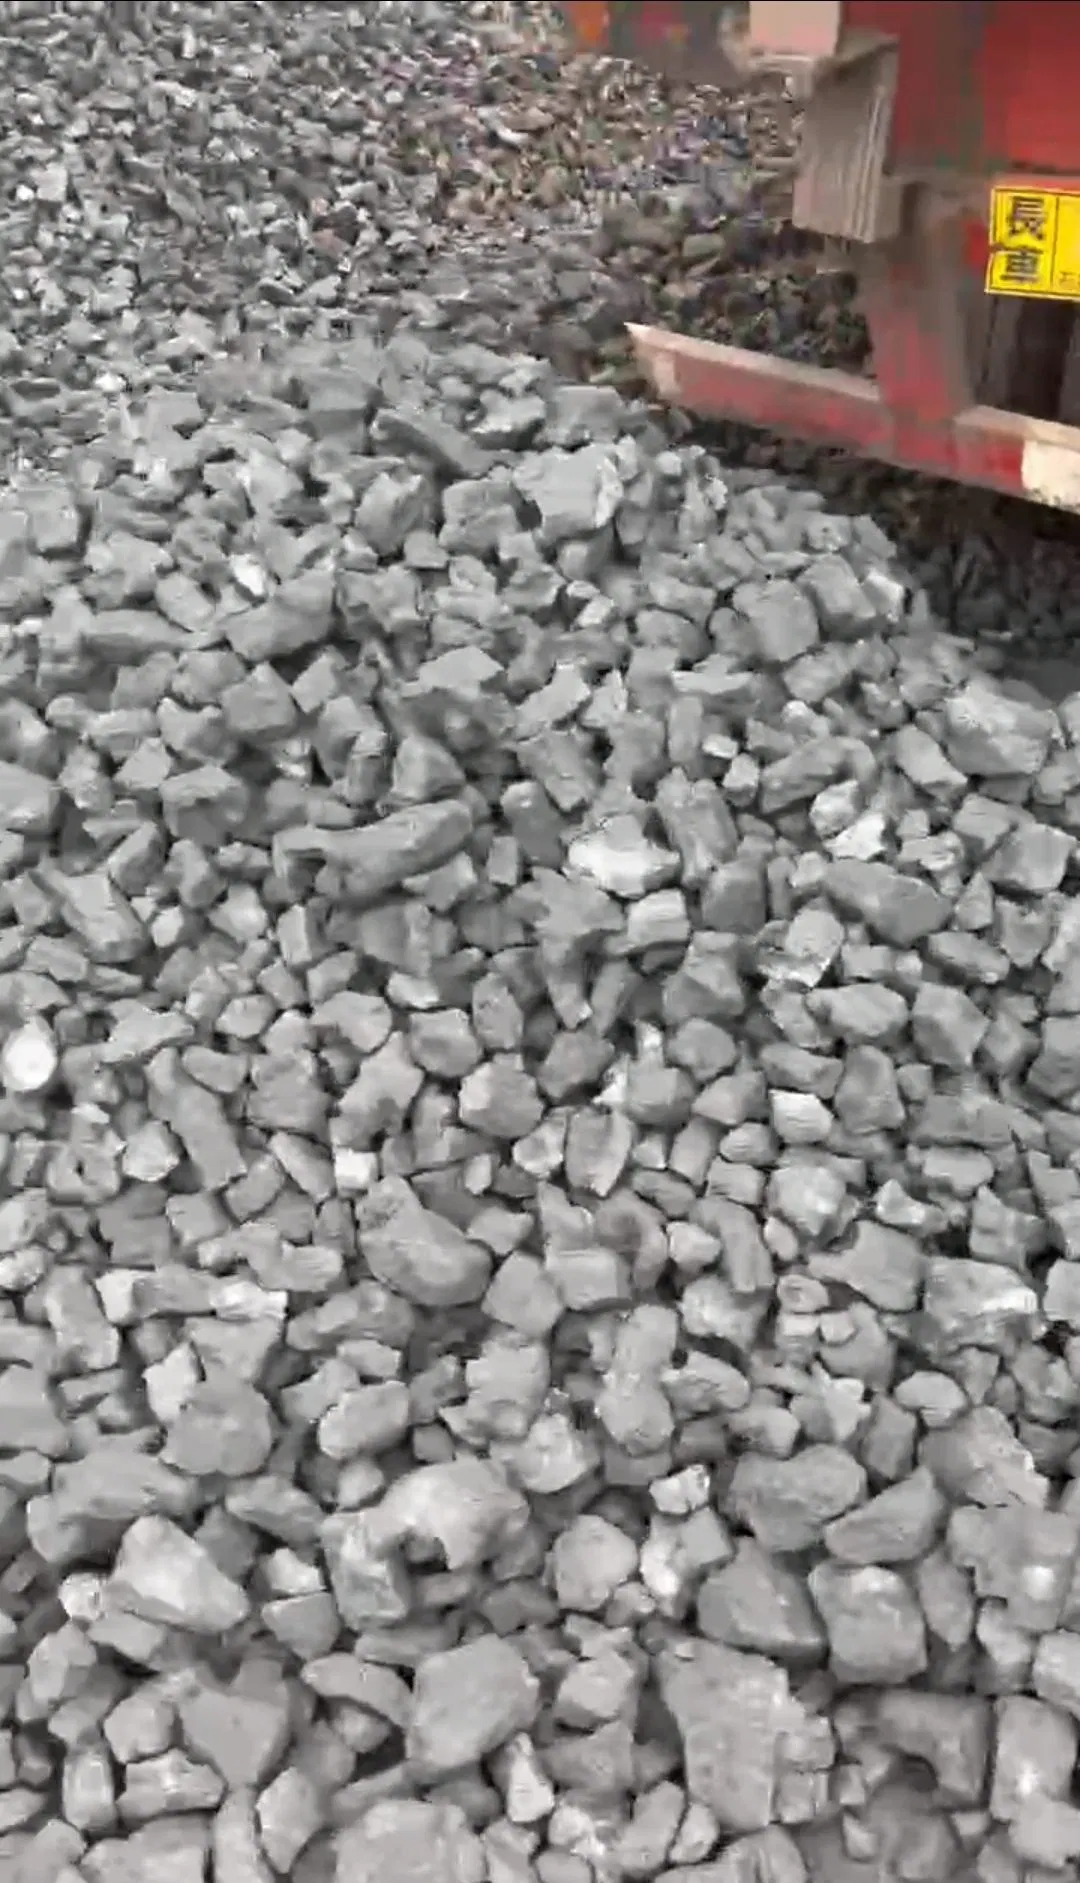 More Than 90% of High-Quality Metallurgical Coke Can Be Used for Blast Furnace Ironmaking